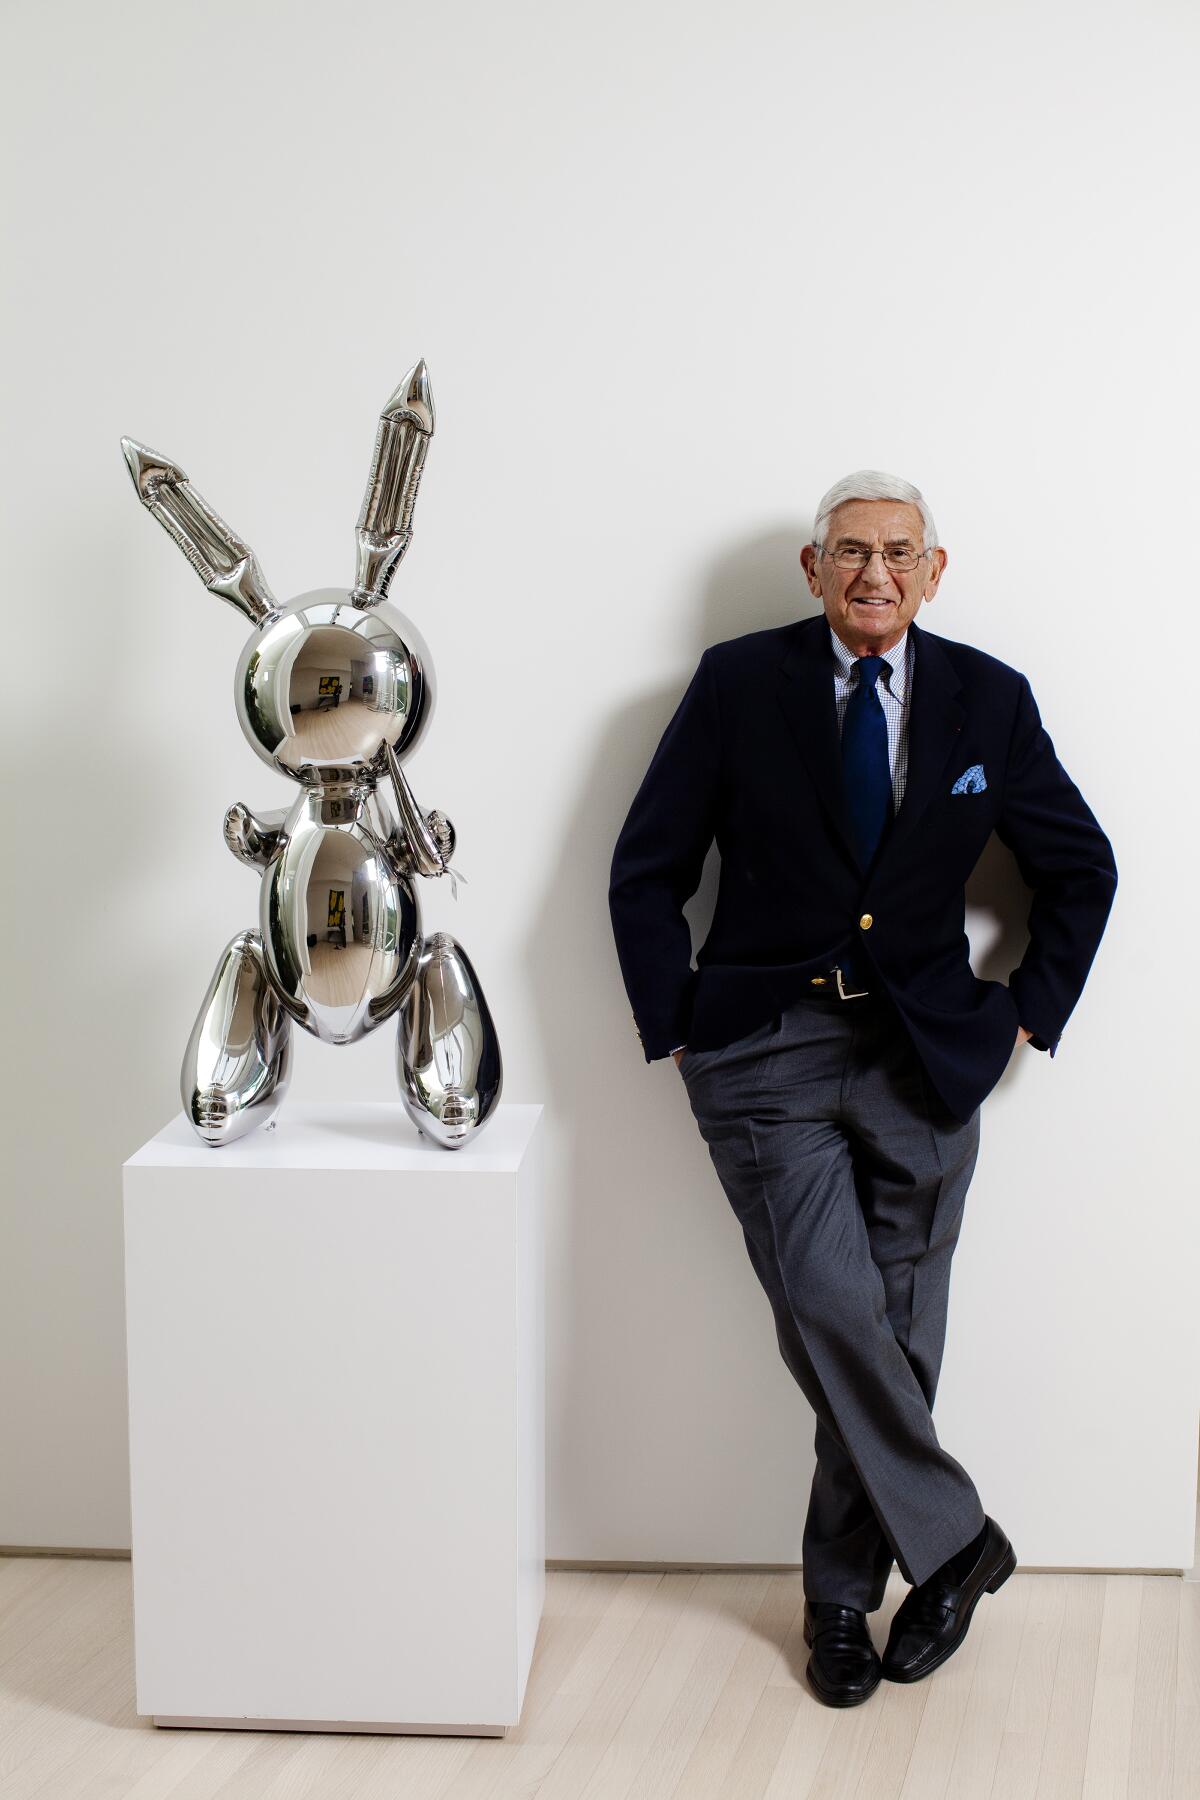 Eli Broad stands next to a stainless-steel sculpture of a balloon-like rabbit figure on a white pedestal